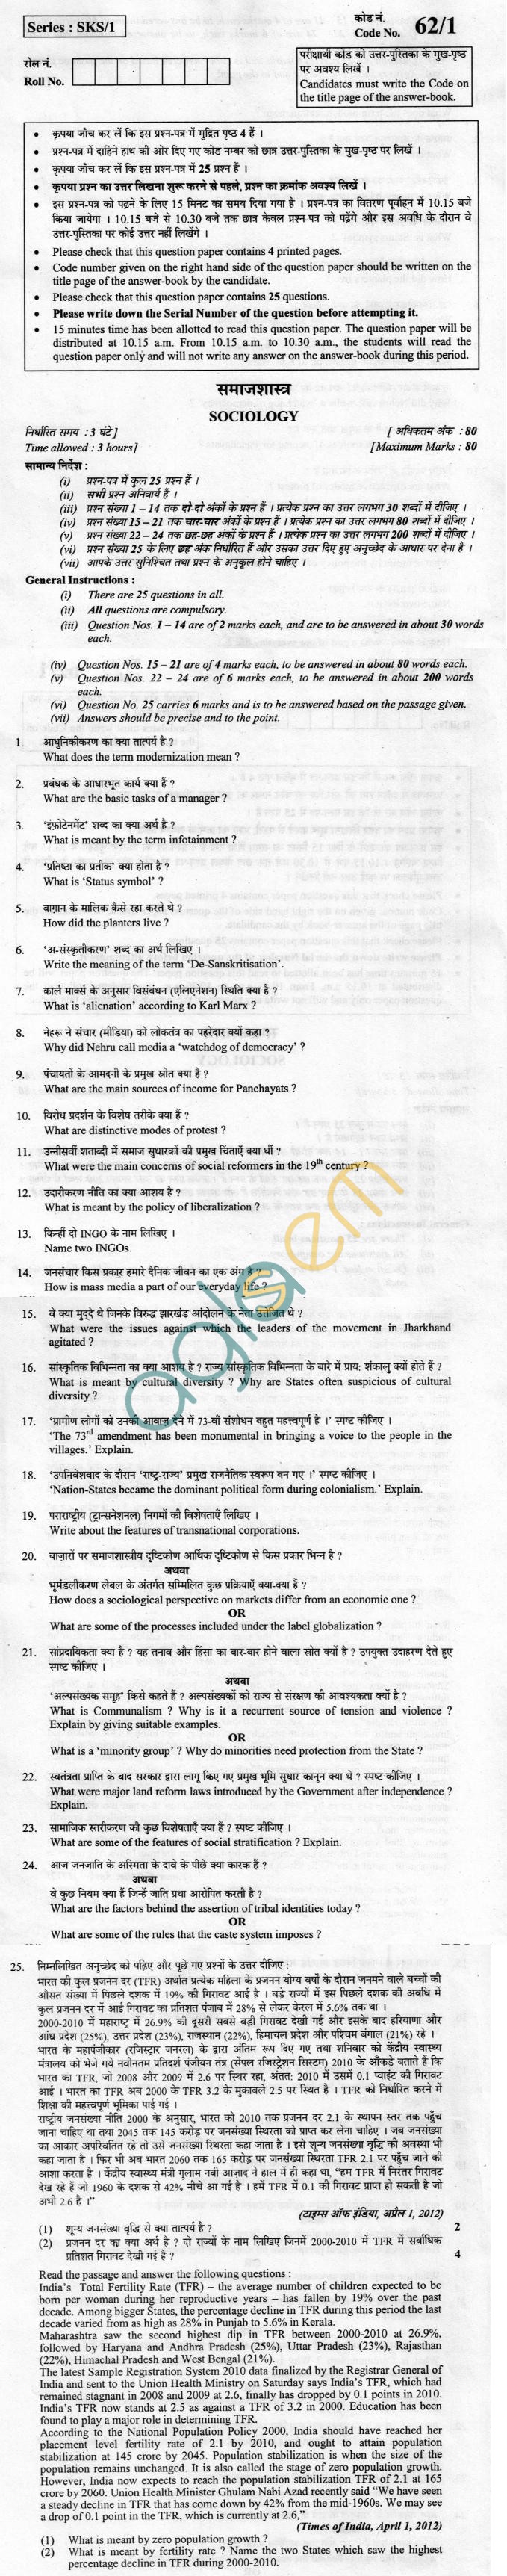 CBSE Board Exam 2013 Class XII Question Paper - Sociology